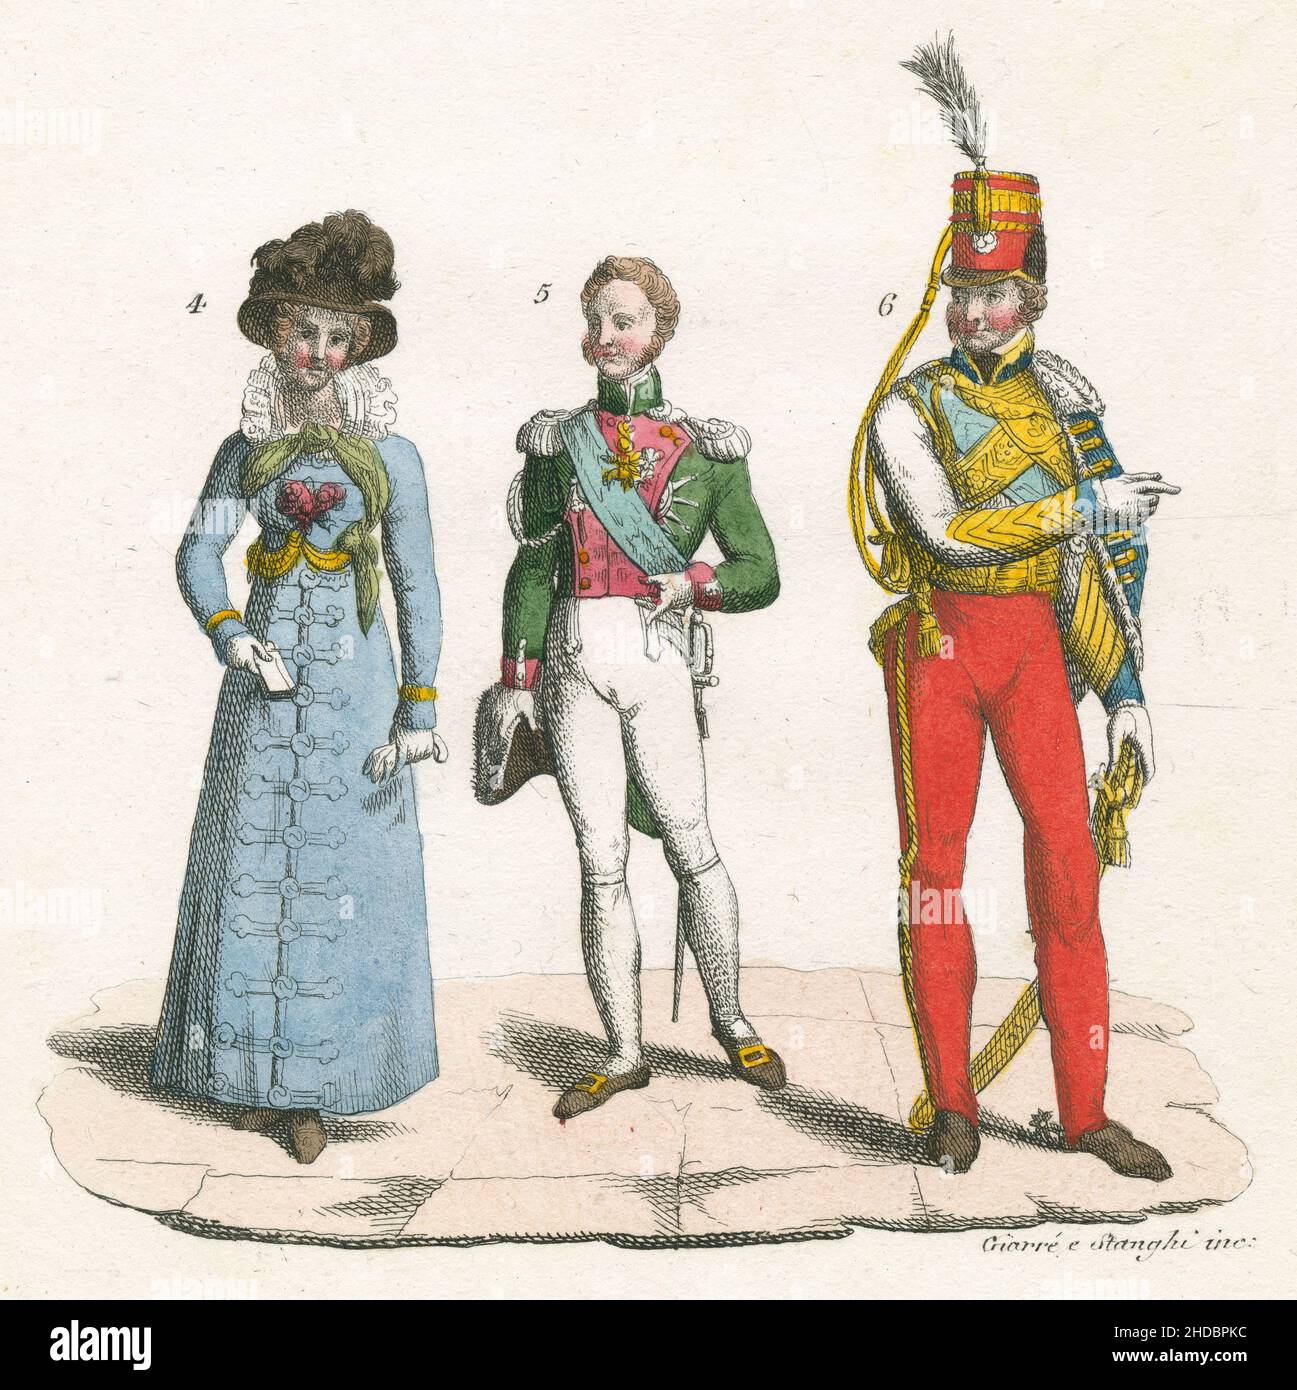 Antique c1830 hand-tinted engraving, fashions of the French court circa 1820. From l to r, (4) Duchess de Berry, (5) Duke of Angoulême, and (6) Duke of Orleans. Published by Giulio Ferrario. SOURCE: ORIGINAL ENGRAVING Stock Photo